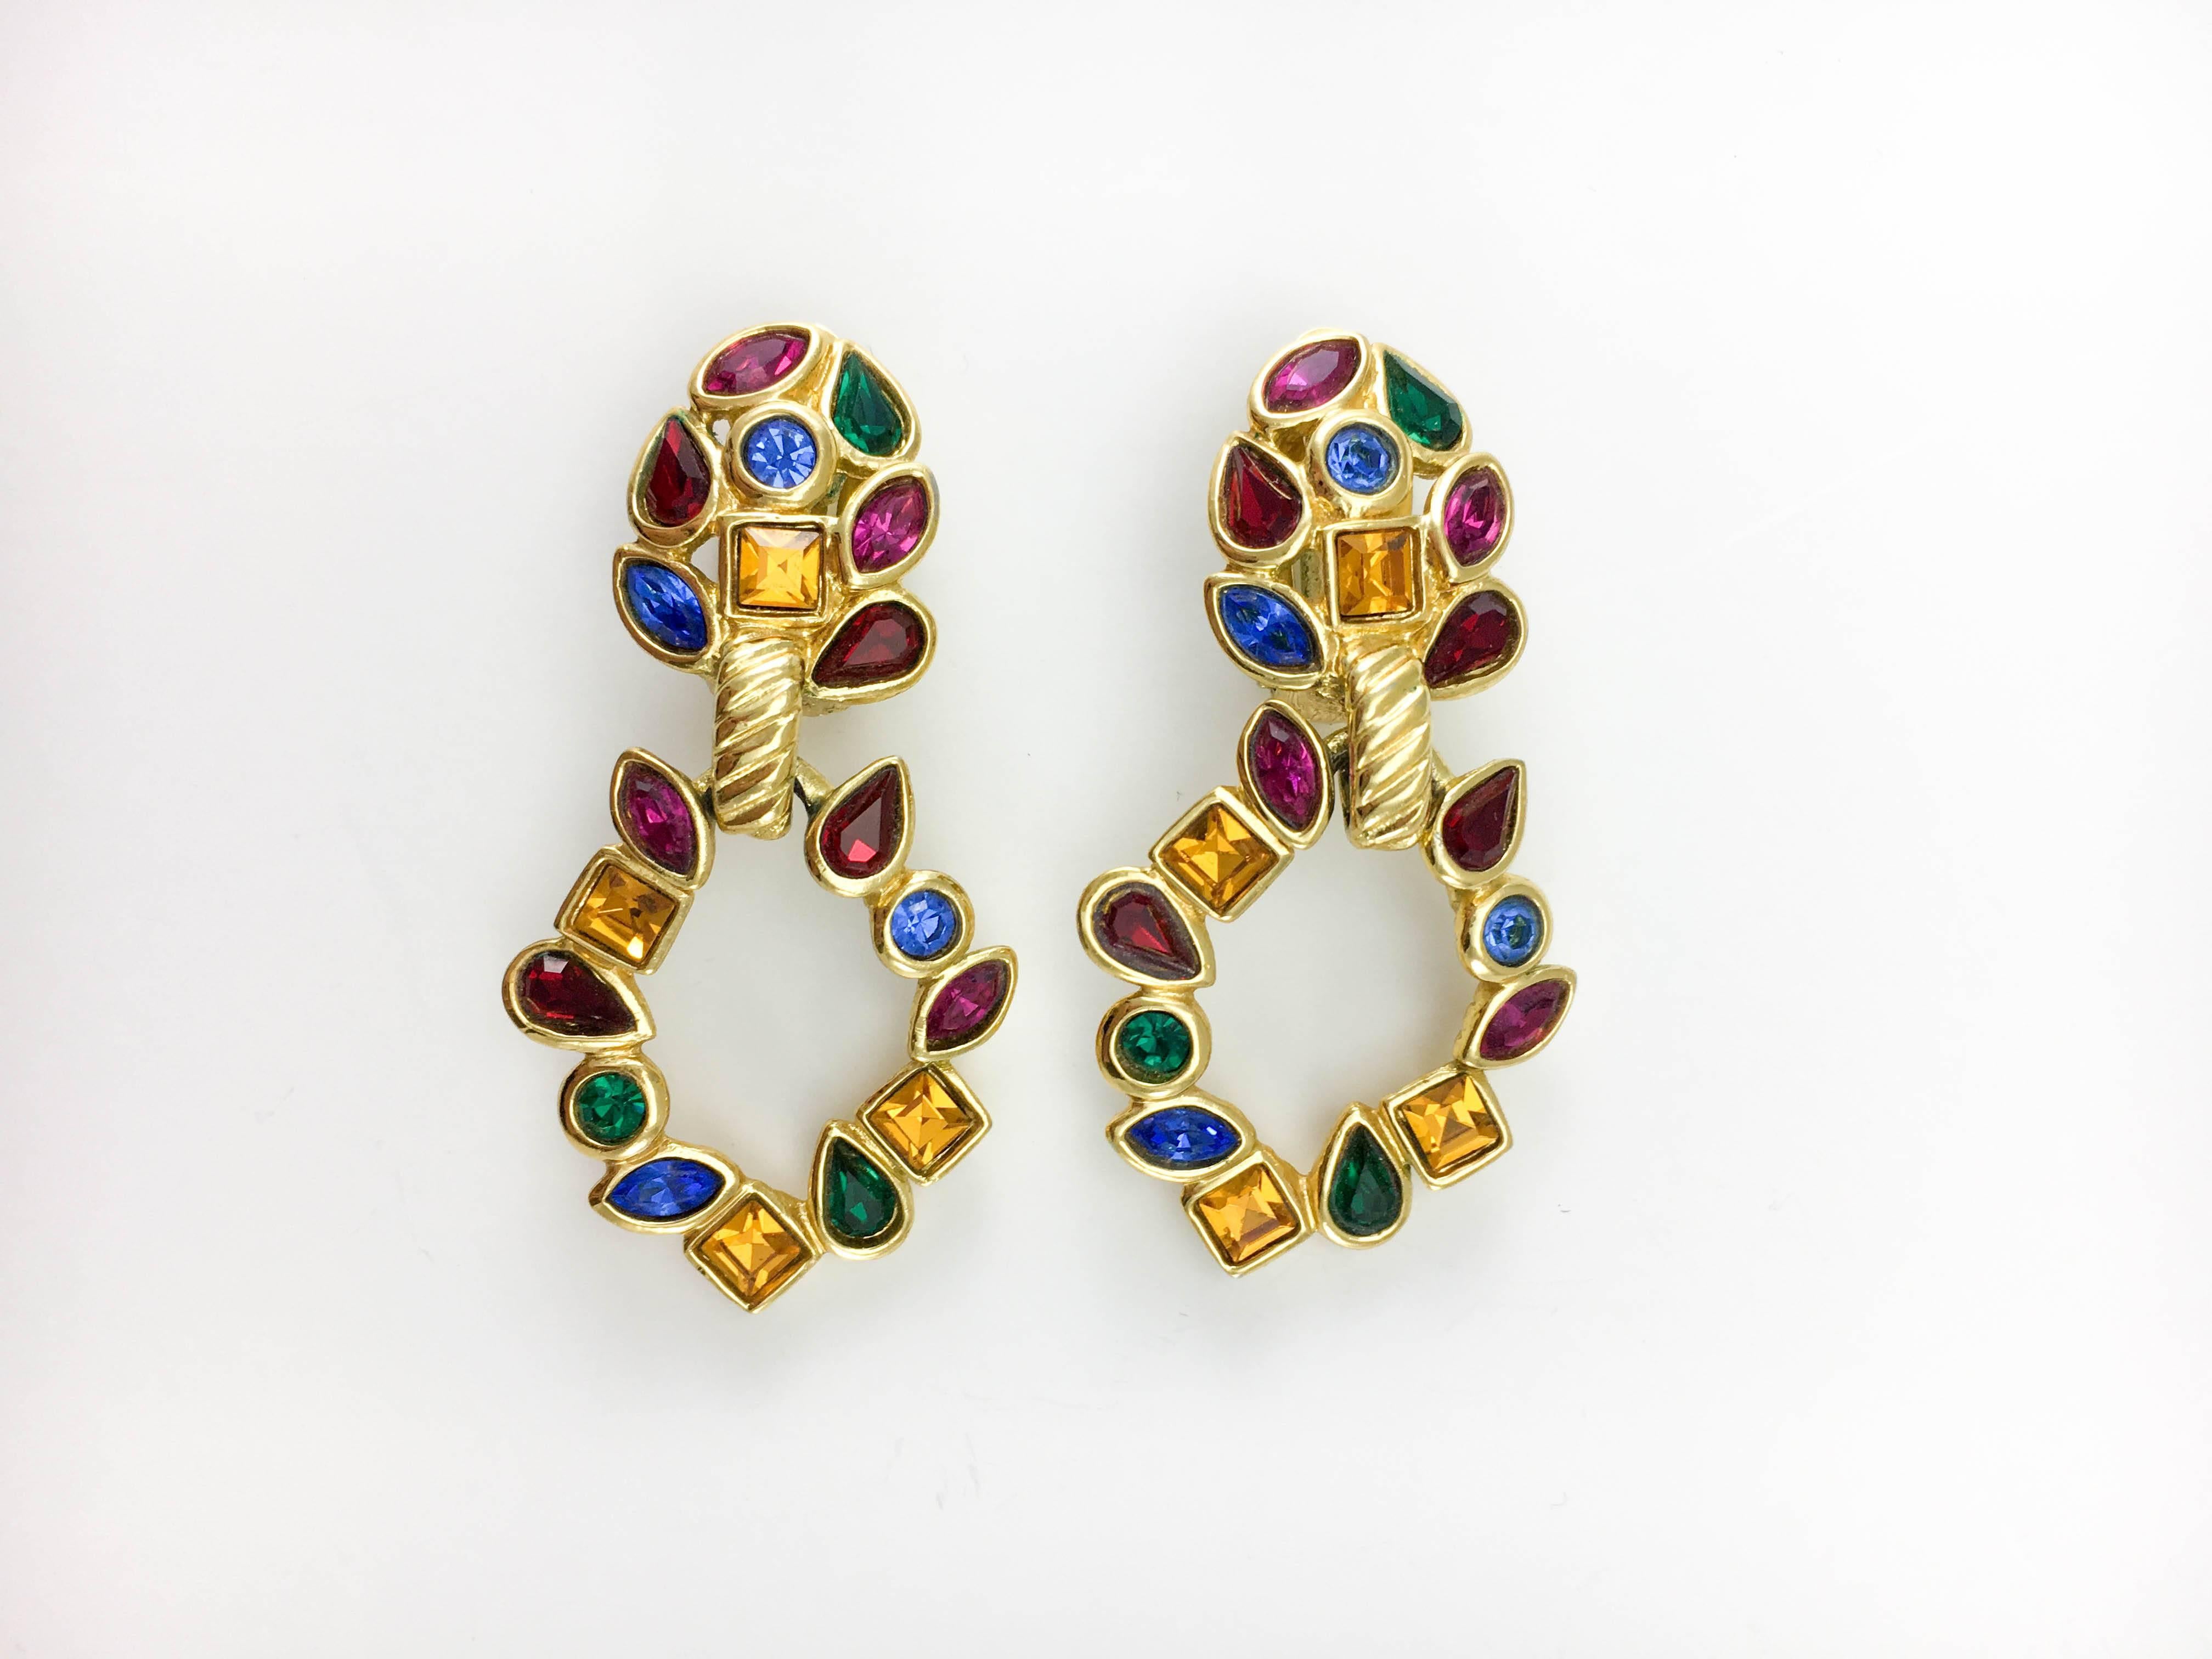 Vintage Yves Saint Laurent Multi-Coloured Glass Beads Dangling Earrings. These beautiful earrings by Yves Saint Laurent date back from the 1980’s. In gilt metal, they are embellished with blue, red, purple, amber and green crystals in different